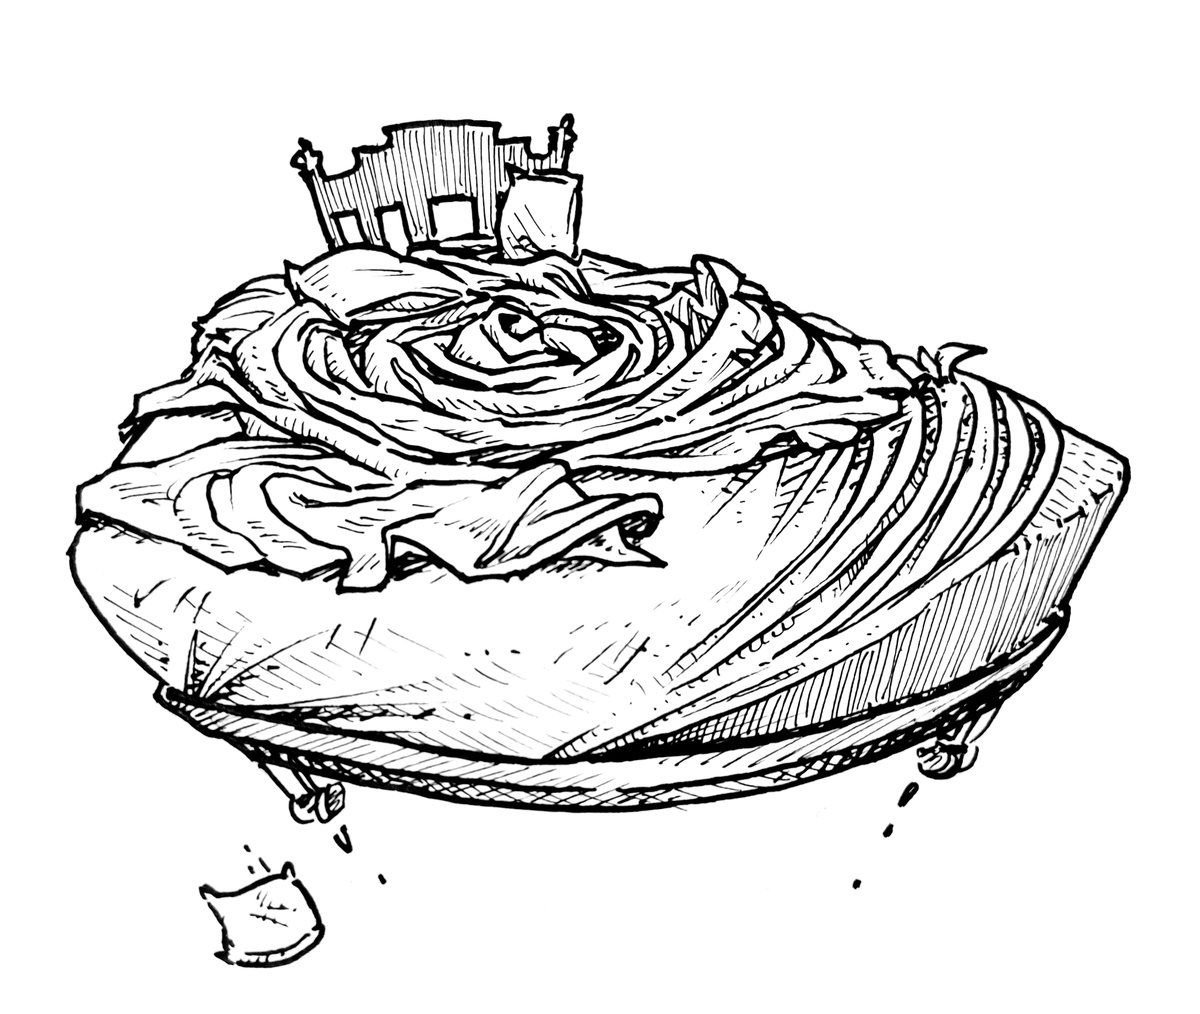 Pen and ink drawing of a spiraling floating bed commissioned by West Gibson